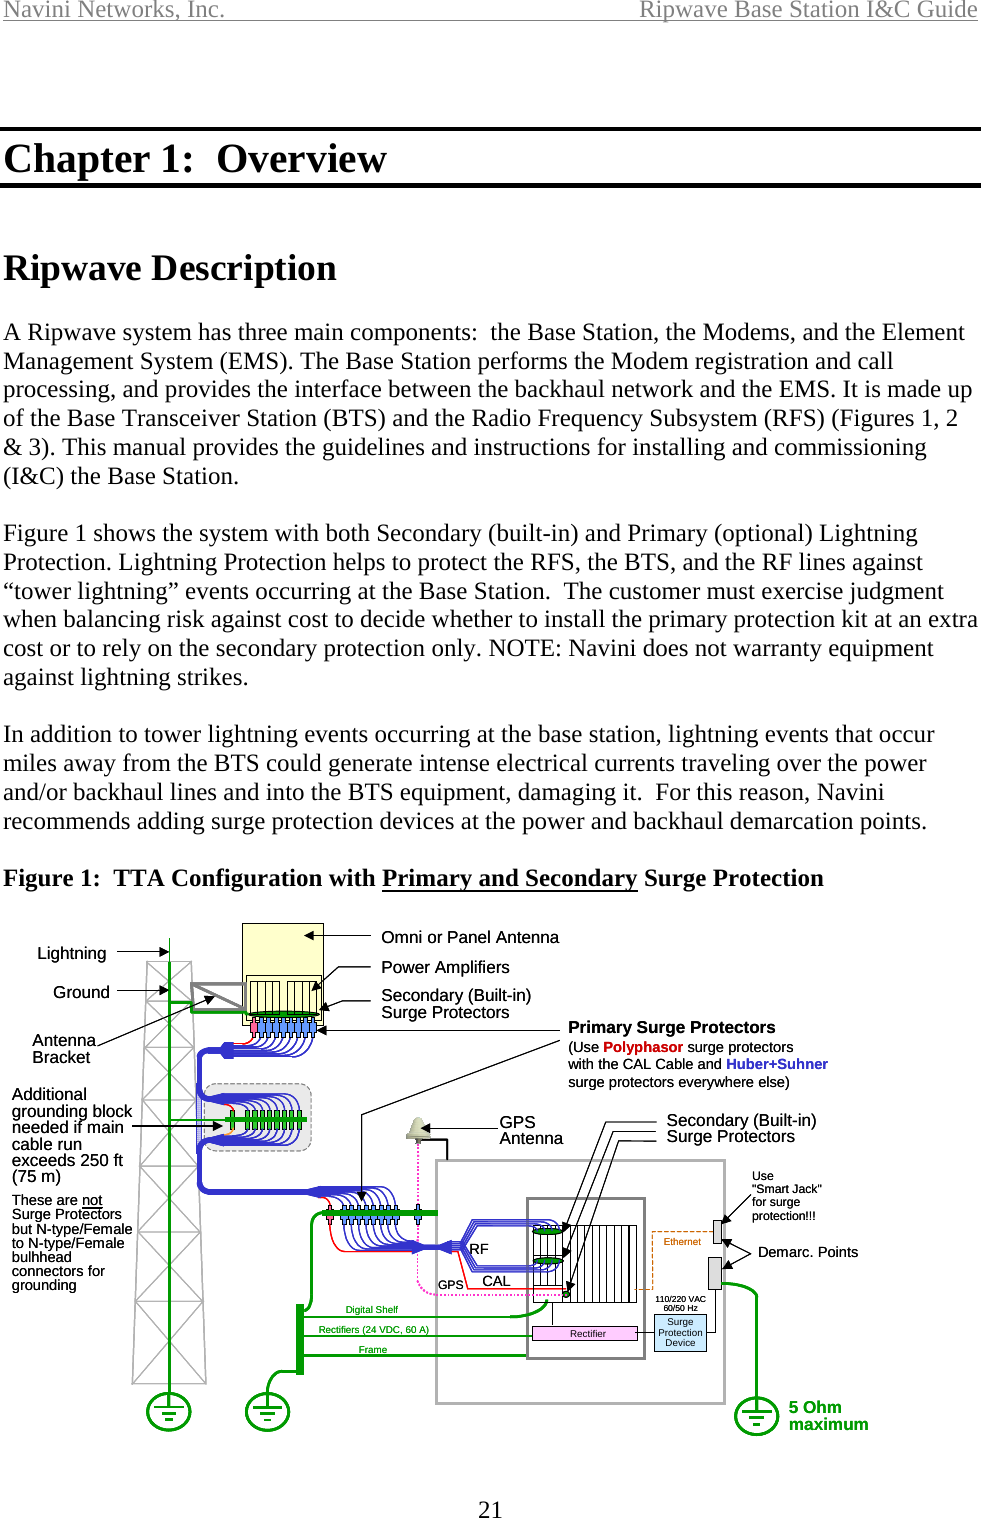 Navini Networks, Inc.  Ripwave Base Station I&amp;C Guide  21   Chapter 1:  Overview   Ripwave Description  A Ripwave system has three main components:  the Base Station, the Modems, and the Element Management System (EMS). The Base Station performs the Modem registration and call processing, and provides the interface between the backhaul network and the EMS. It is made up of the Base Transceiver Station (BTS) and the Radio Frequency Subsystem (RFS) (Figures 1, 2 &amp; 3). This manual provides the guidelines and instructions for installing and commissioning (I&amp;C) the Base Station.  Figure 1 shows the system with both Secondary (built-in) and Primary (optional) Lightning Protection. Lightning Protection helps to protect the RFS, the BTS, and the RF lines against “tower lightning” events occurring at the Base Station.  The customer must exercise judgment when balancing risk against cost to decide whether to install the primary protection kit at an extra cost or to rely on the secondary protection only. NOTE: Navini does not warranty equipment against lightning strikes.  In addition to tower lightning events occurring at the base station, lightning events that occur miles away from the BTS could generate intense electrical currents traveling over the power and/or backhaul lines and into the BTS equipment, damaging it.  For this reason, Navini recommends adding surge protection devices at the power and backhaul demarcation points.  Figure 1:  TTA Configuration with Primary and Secondary Surge Protection  CALDigital ShelfRectifiers (24 VDC, 60 A)FrameGPS GPSAntenna Secondary (Built-in)Surge ProtectorsRF Ethernet110/220 VAC60/50 HzDemarc. PointsOmni or Panel AntennaPower AmplifiersSecondary (Built-in)Surge ProtectorsLightningGroundAntennaBracketPrimary Surge Protectors(Use Polyphasor surge protectorswith the CAL Cable and Huber+Suhnersurge protectors everywhere else)Additional grounding block needed if main cable run exceeds 250 ft (75 m)These are notSurge Protectors but N-type/Female to N-type/Female bulhhead connectors for grounding5 Ohm maximumUse&quot;Smart Jack&quot; for surgeprotection!!!Rectifier SurgeProtectionDeviceCALDigital ShelfRectifiers (24 VDC, 60 A)FrameGPS GPSAntenna Secondary (Built-in)Surge ProtectorsRF Ethernet110/220 VAC60/50 HzDemarc. PointsOmni or Panel AntennaPower AmplifiersSecondary (Built-in)Surge ProtectorsLightningGroundAntennaBracketPrimary Surge Protectors(Use Polyphasor surge protectorswith the CAL Cable and Huber+Suhnersurge protectors everywhere else)Additional grounding block needed if main cable run exceeds 250 ft (75 m)These are notSurge Protectors but N-type/Female to N-type/Female bulhhead connectors for grounding5 Ohm maximumUse&quot;Smart Jack&quot; for surgeprotection!!!Rectifier SurgeProtectionDeviceSurgeProtectionDevice